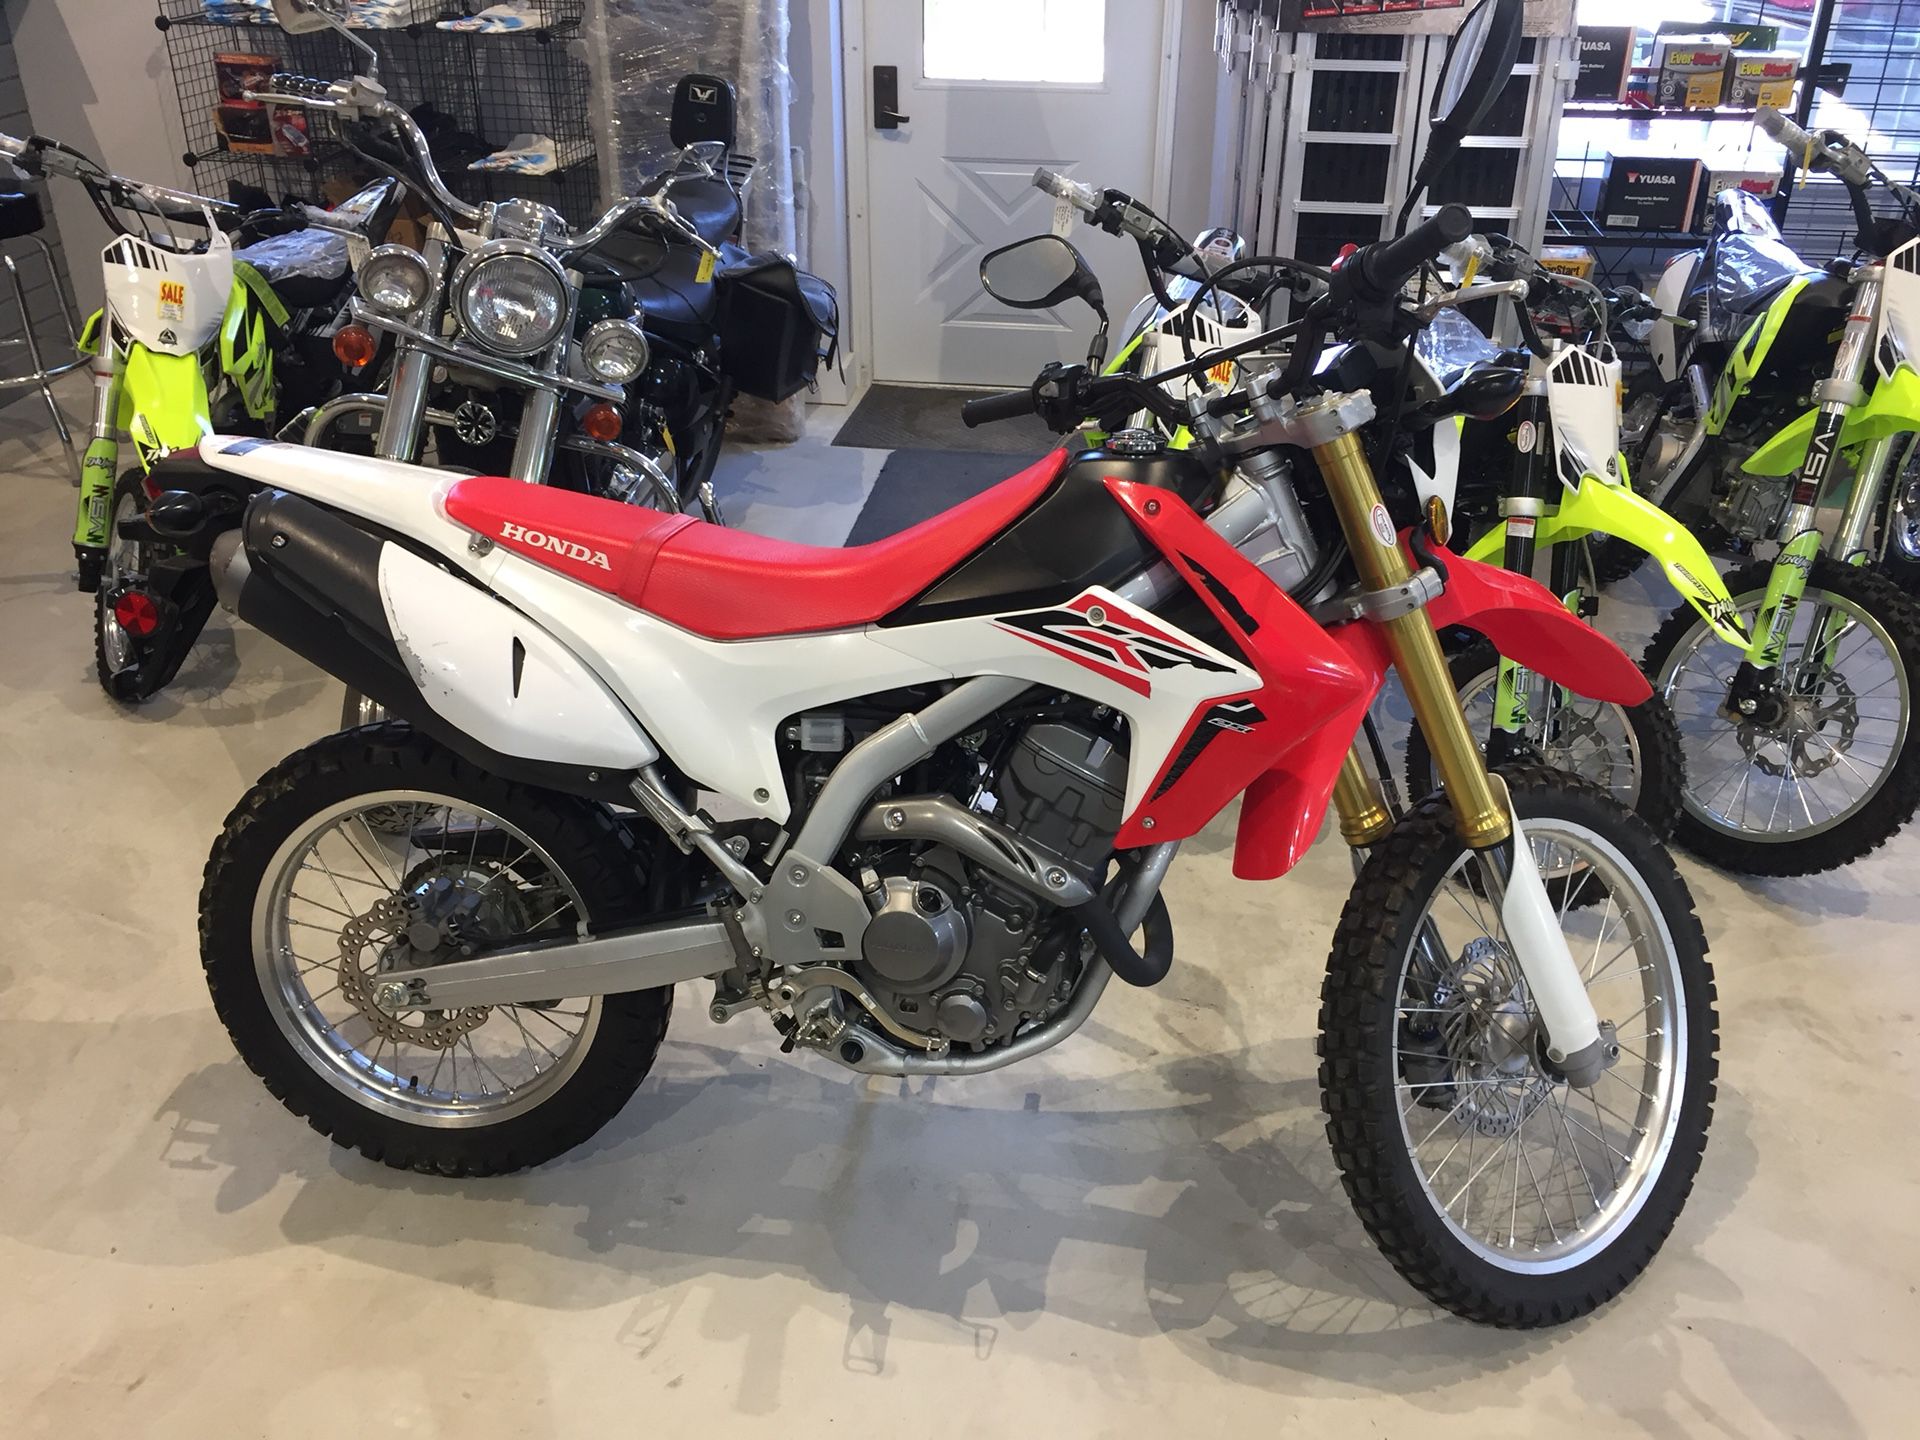 2016 Honda CRF250LG CRF 250 LG Electric start 1489 miles, red+white, on/off road motorcycle / dirt bike will trade